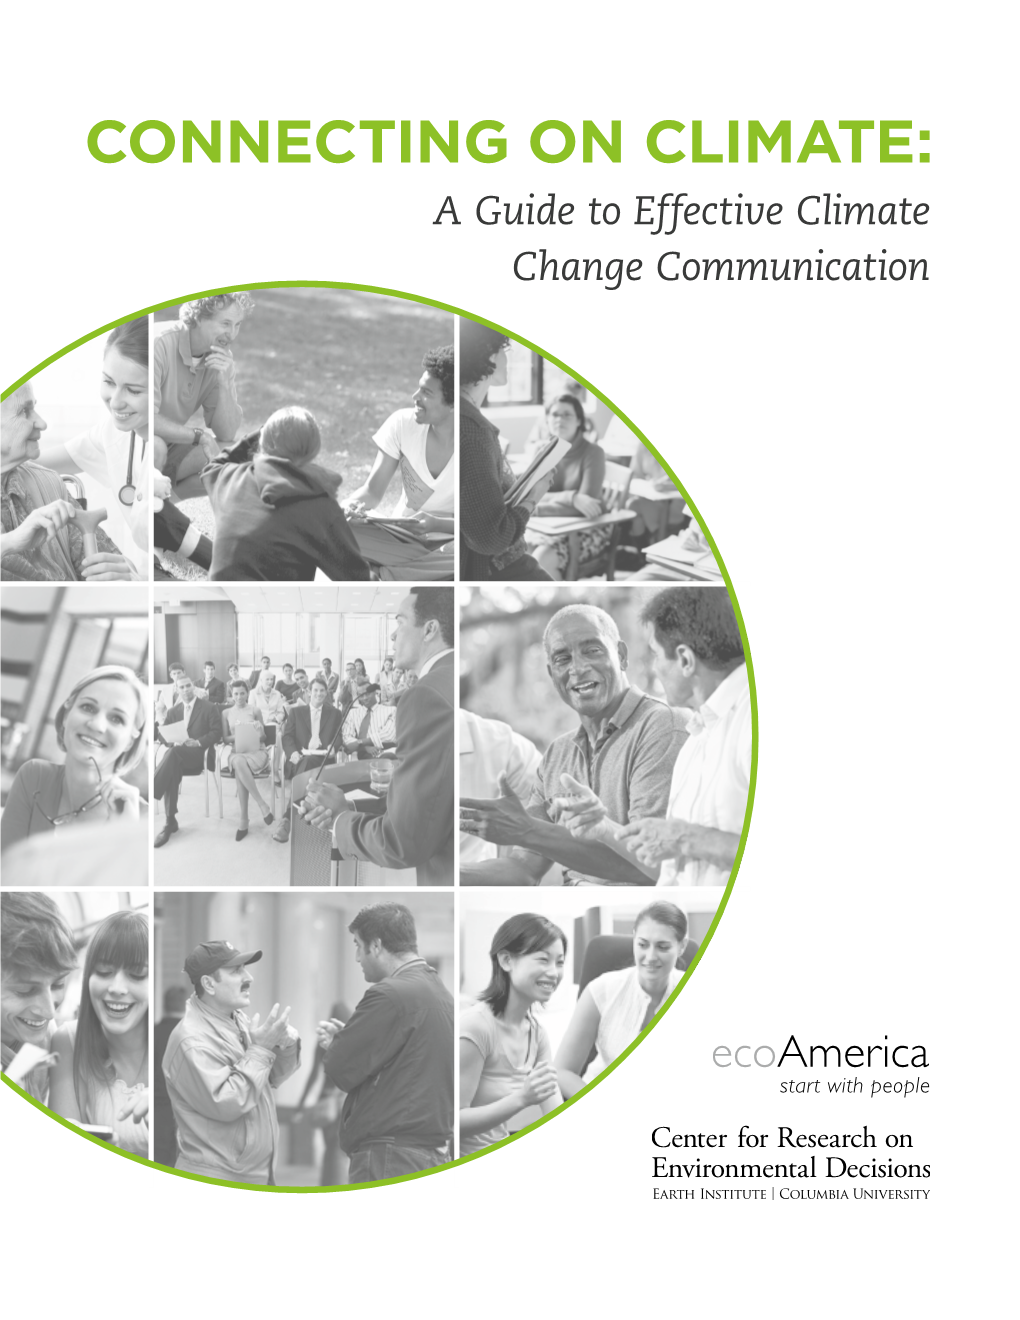 CONNECTING on CLIMATE: a Guide to Effective Climate Change Communication